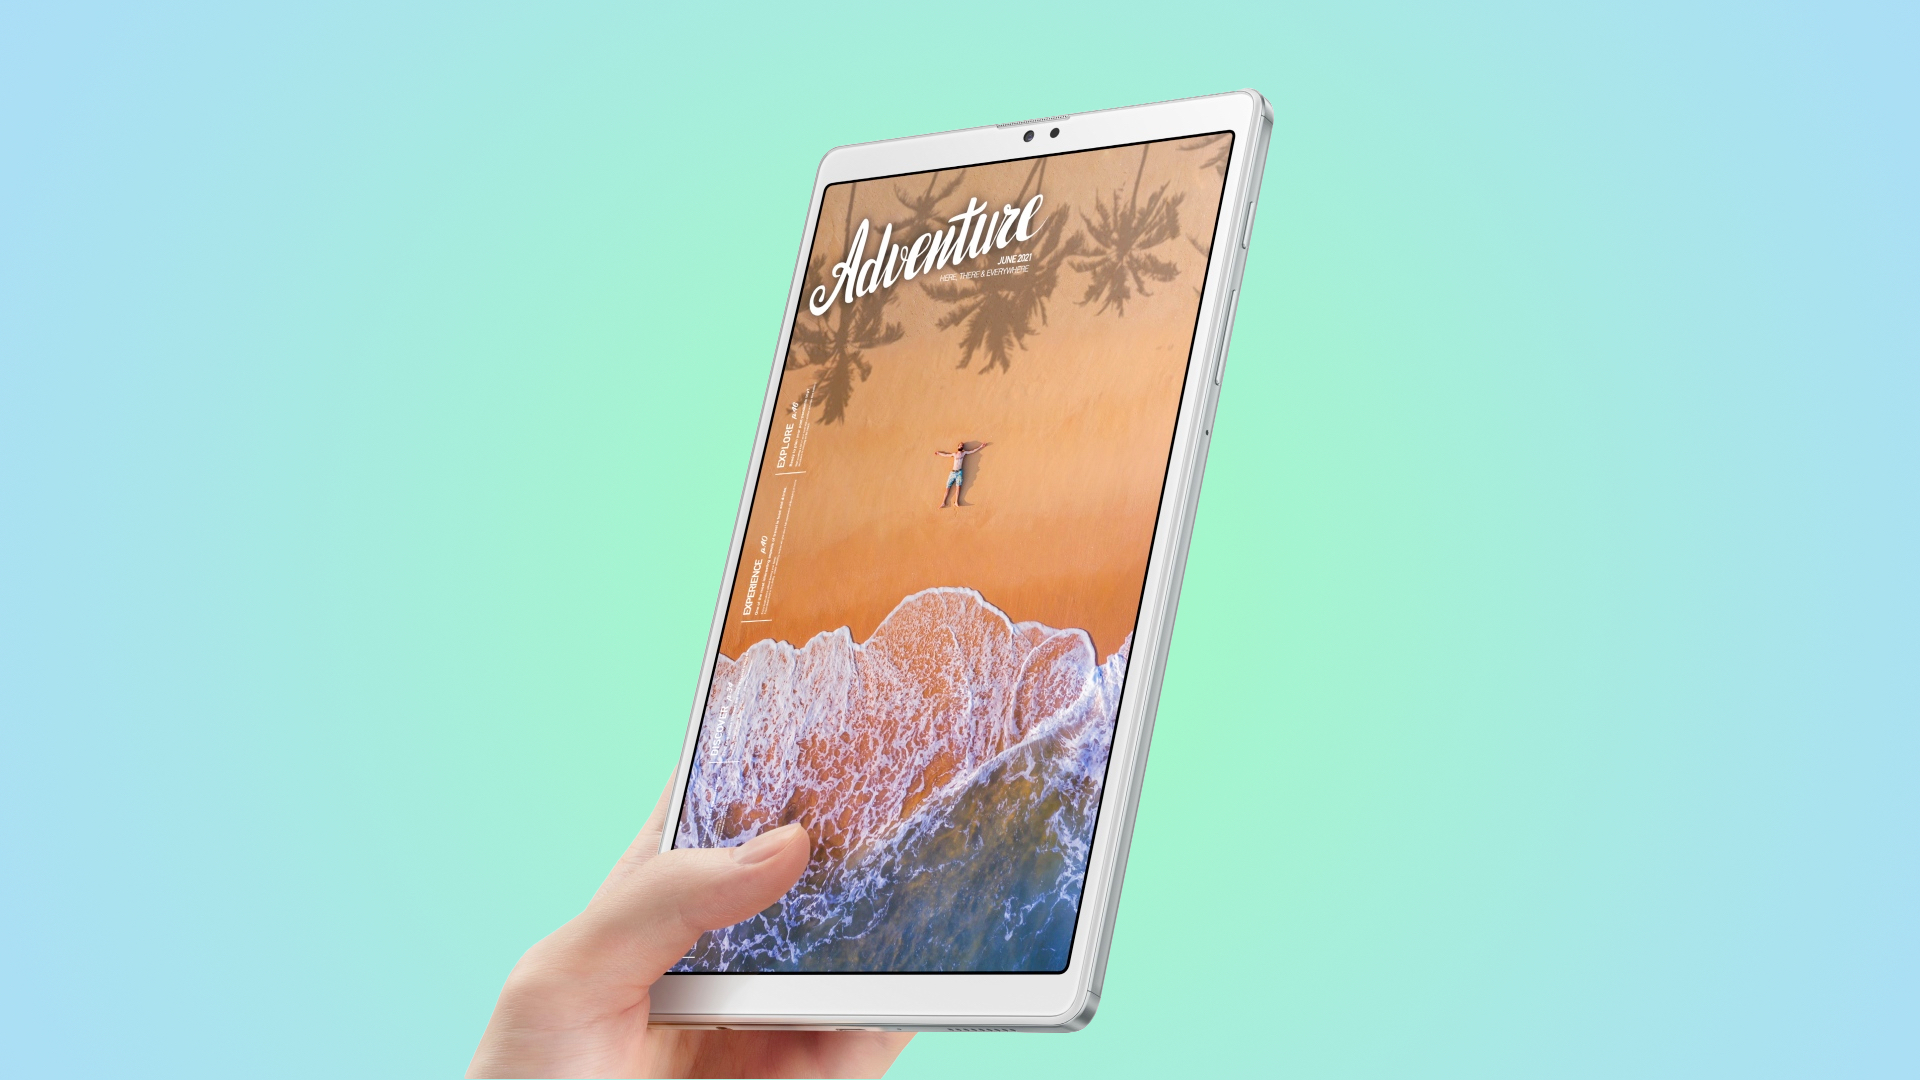 Samsung Galaxy Tab A7 Lite gains new features with One UI 5.1.1 update -  SamMobile